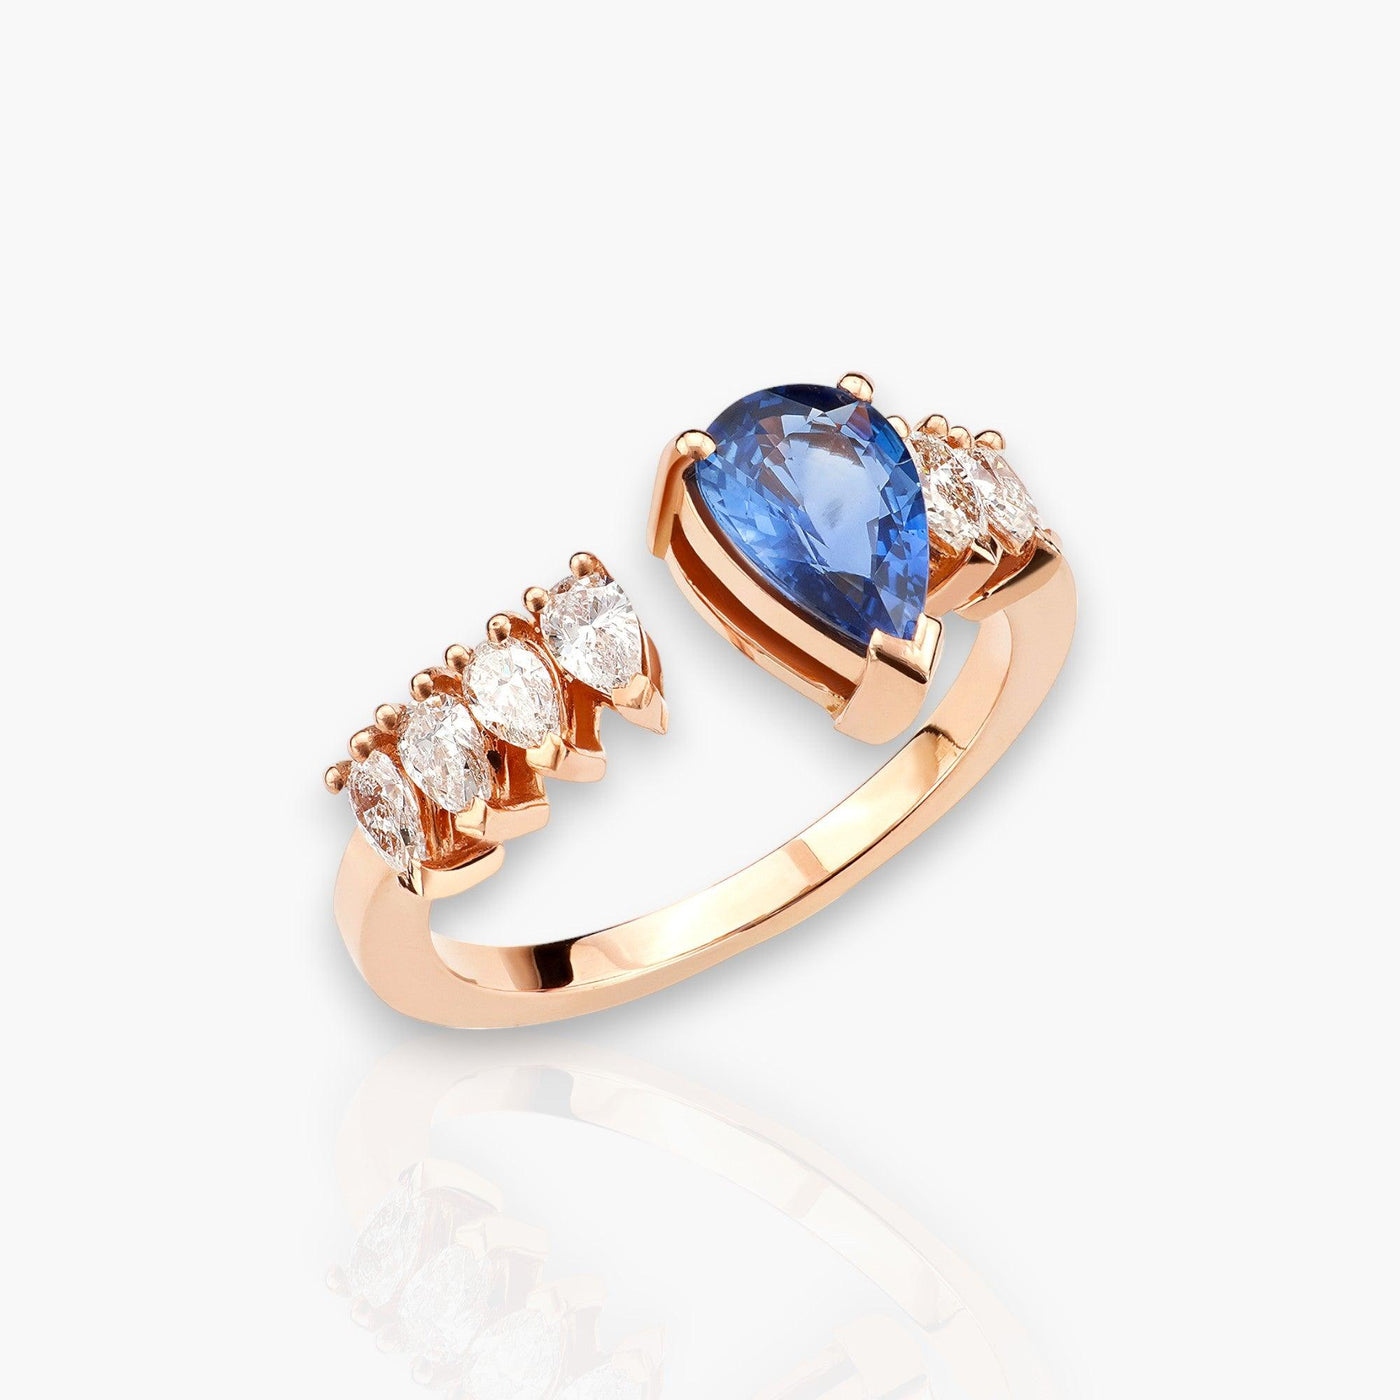 Drop Ring, Rose Gold, Diamonds And Blue Sapphire - Moregola Fine Jewelry